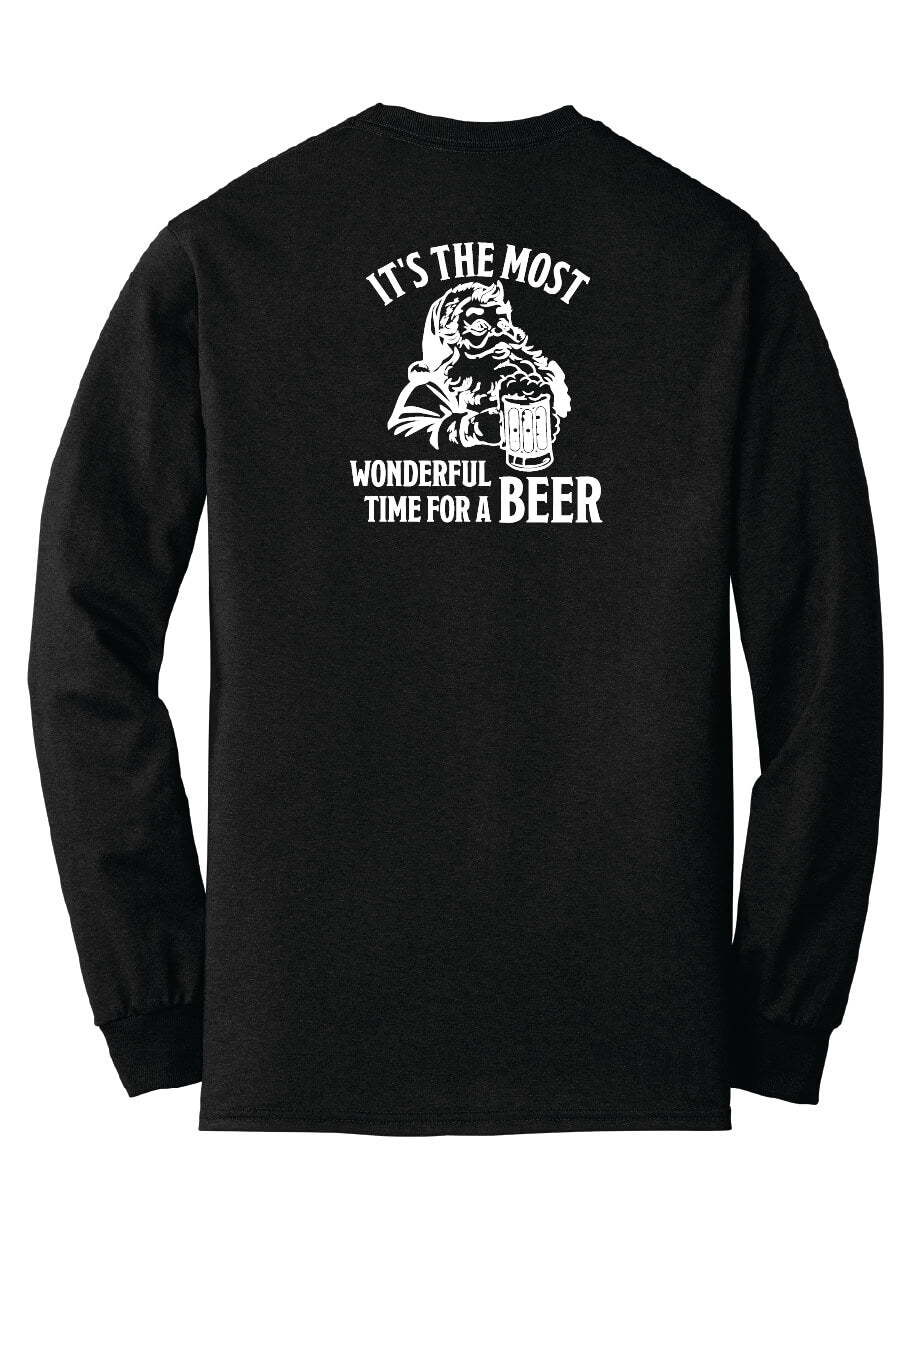 It's the Most Wonderful Time for a Beer long sleeve shirt back